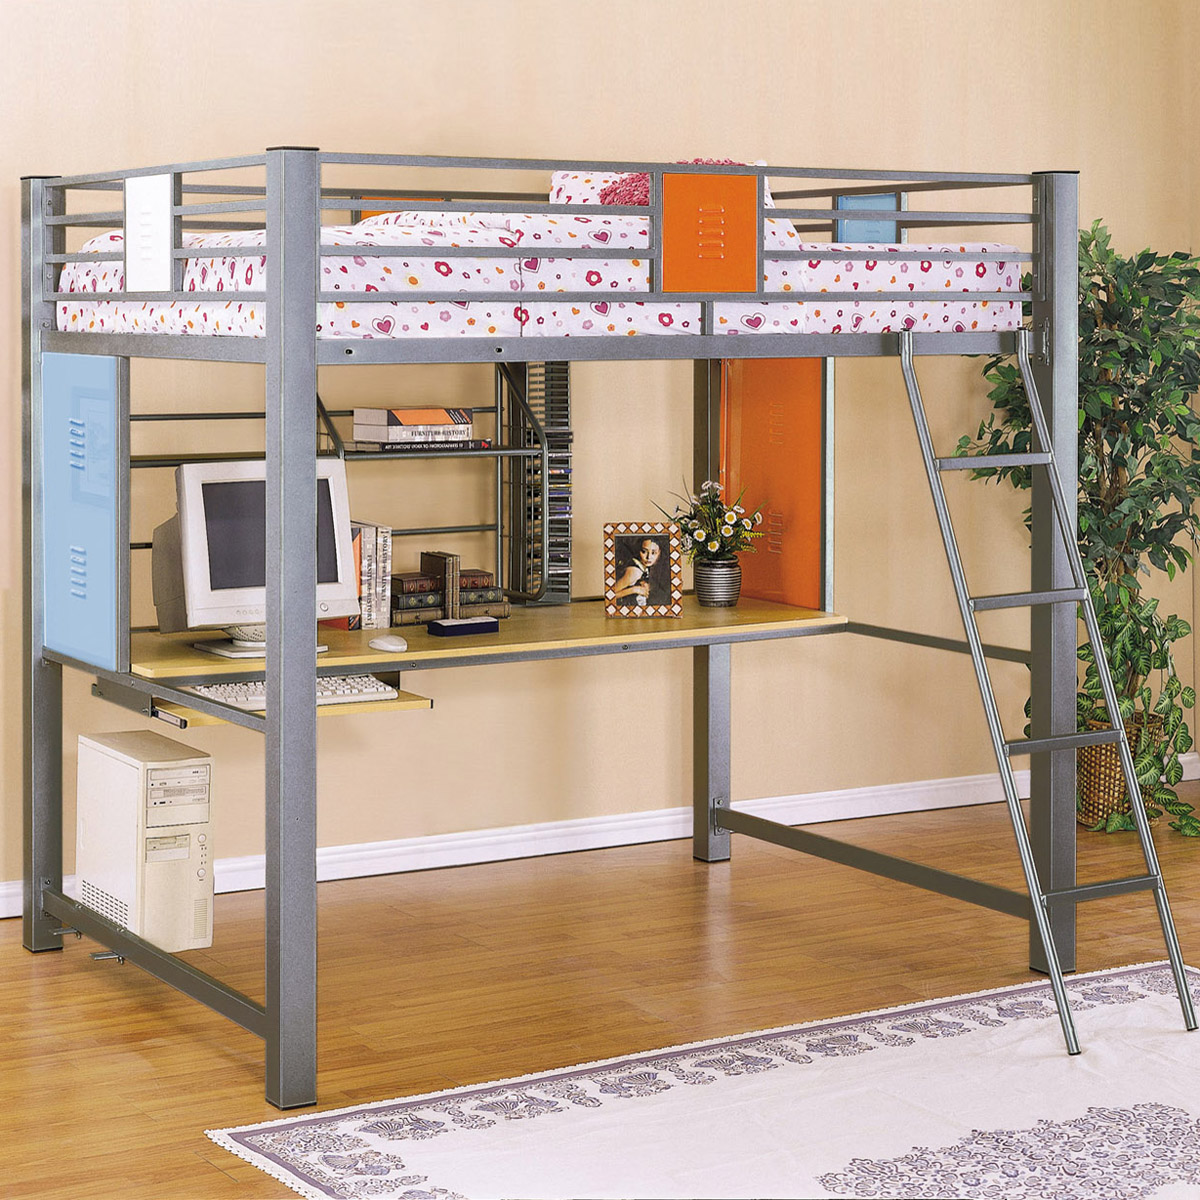 Full Bunk Bed With Desk Underneath, Metal Bunk Bed With Desk Under